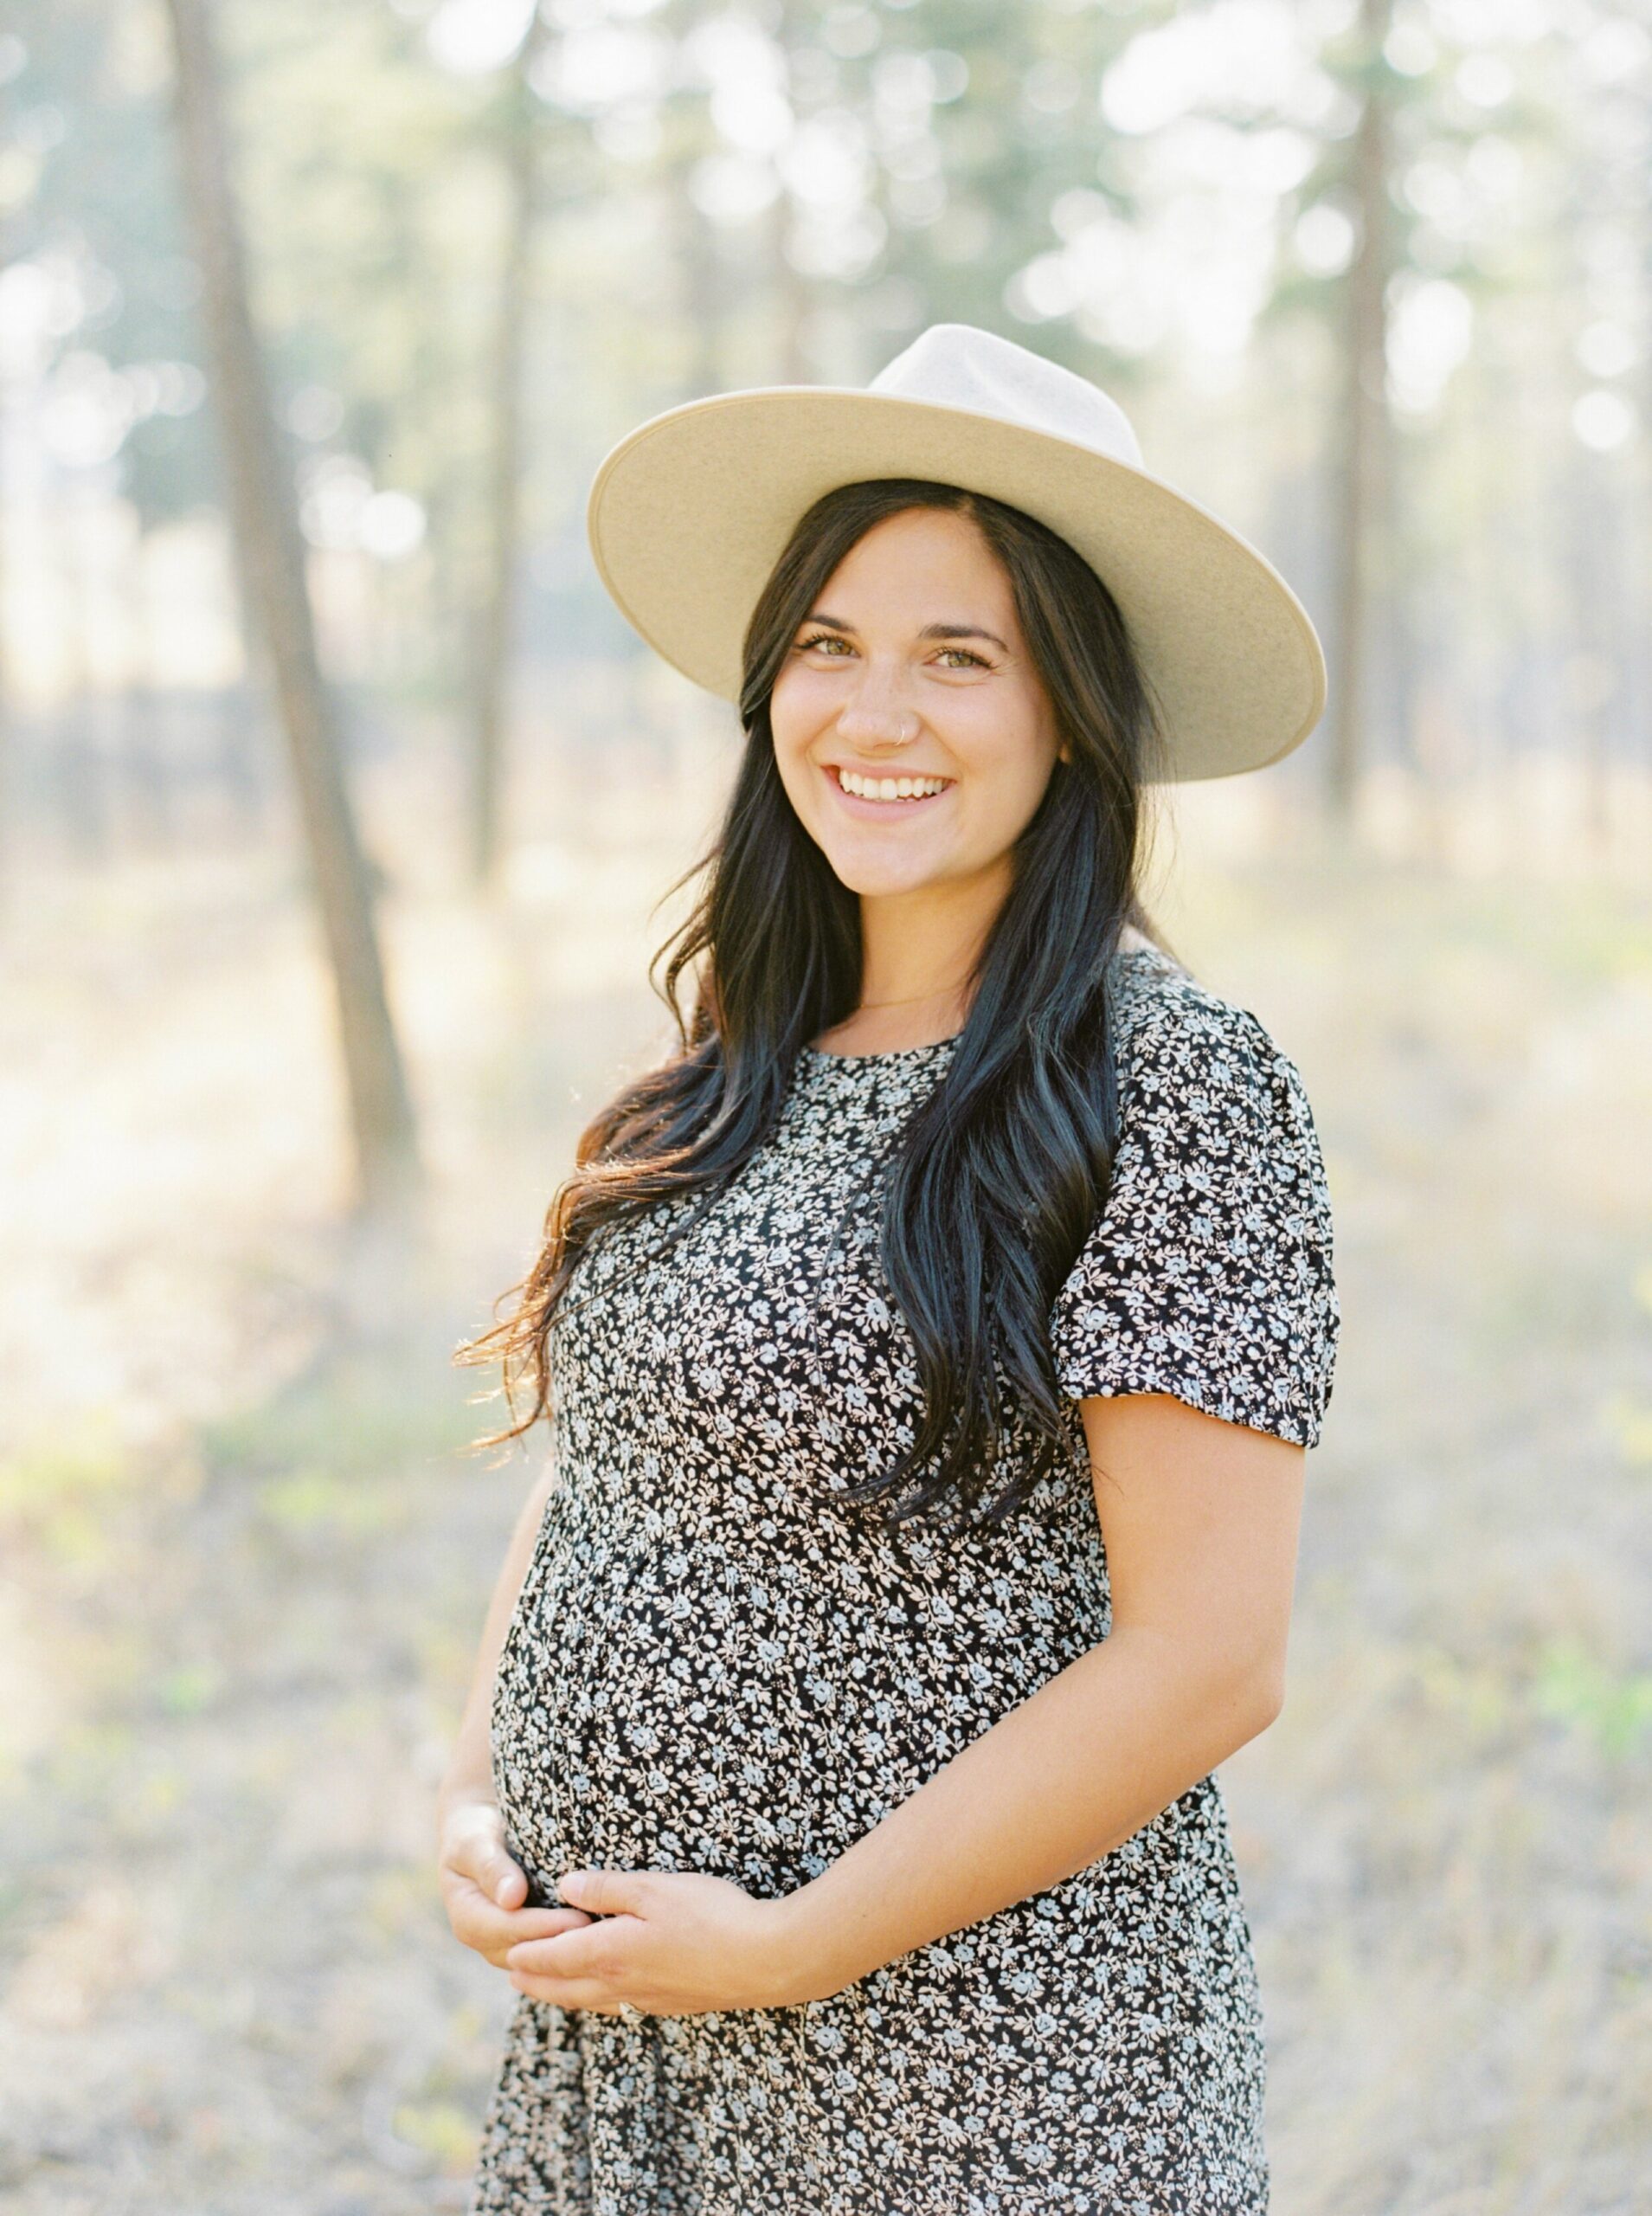  maternity session pose ideas | outfit suggestions for photo shoots | maternity family session | Calgary maternity photographer | Justine milton 